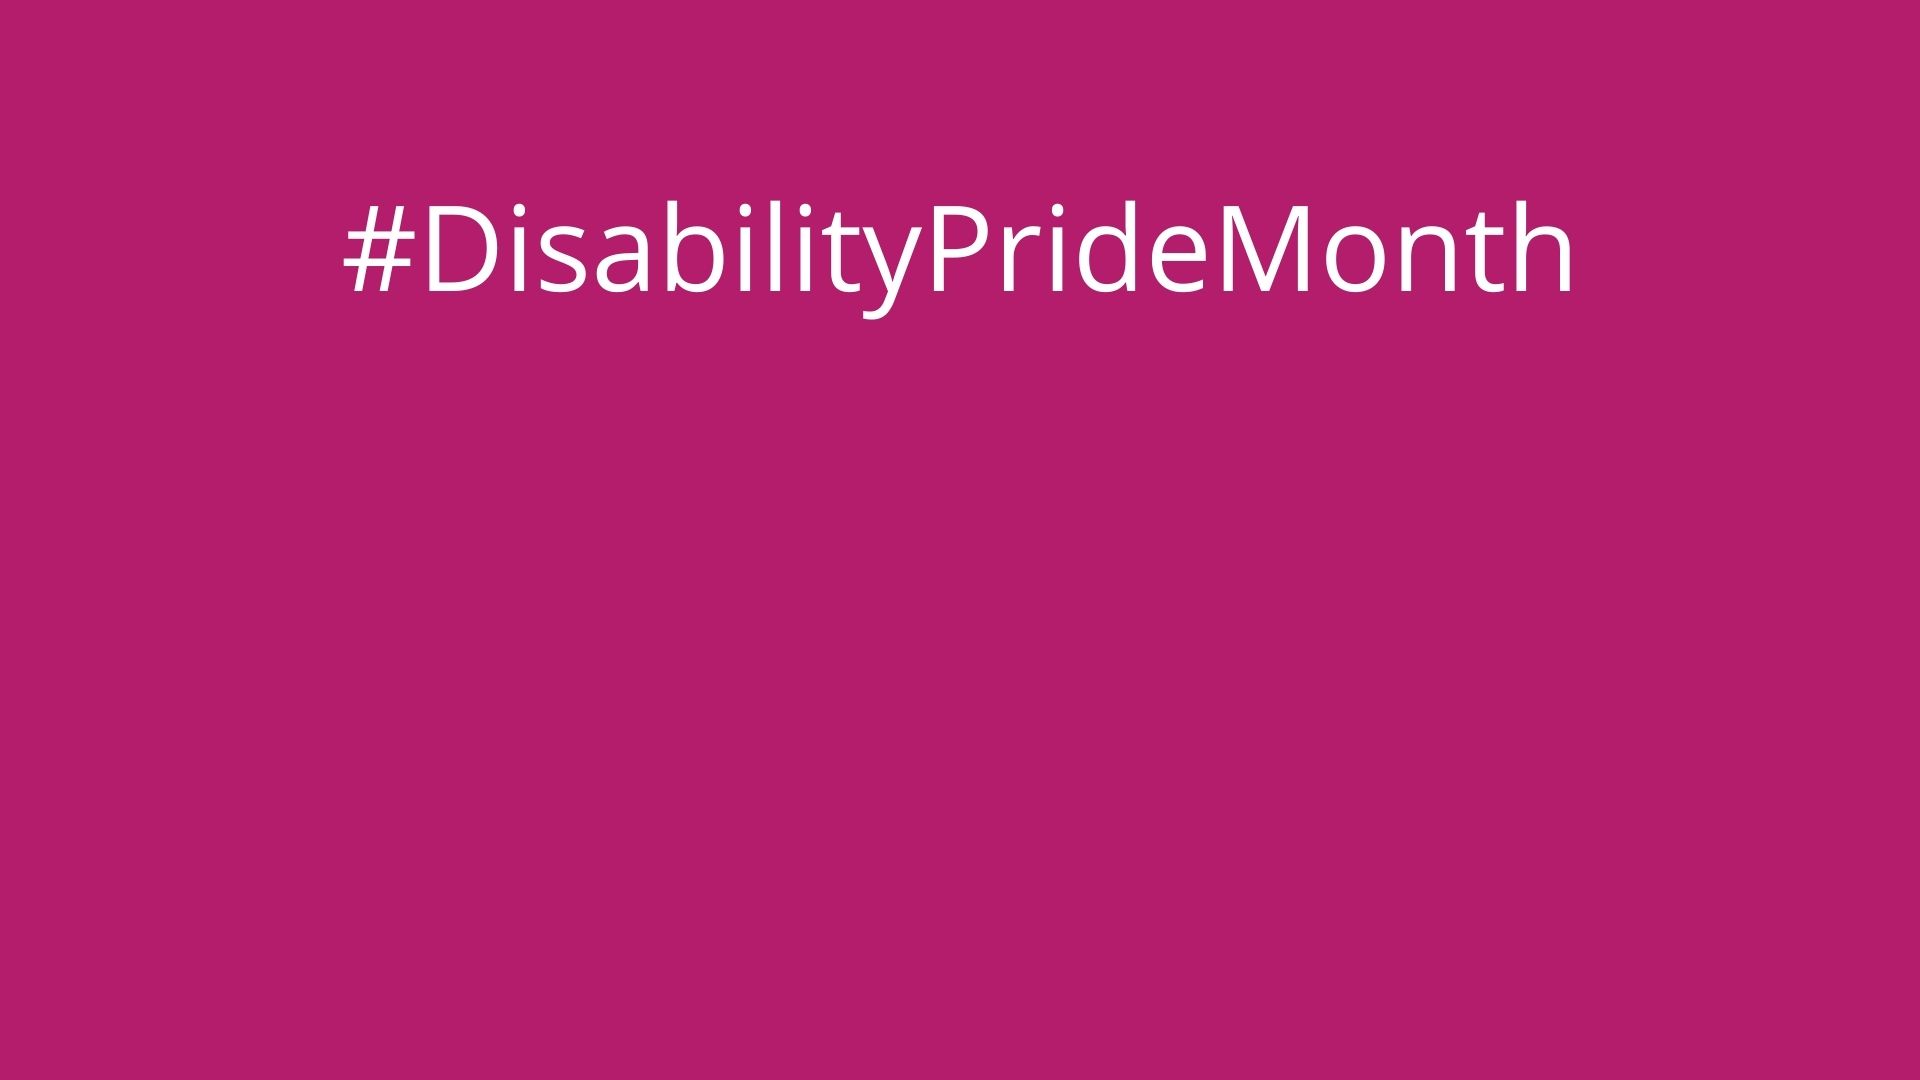 the hashtag Disability Pride Month written in white on a pink background